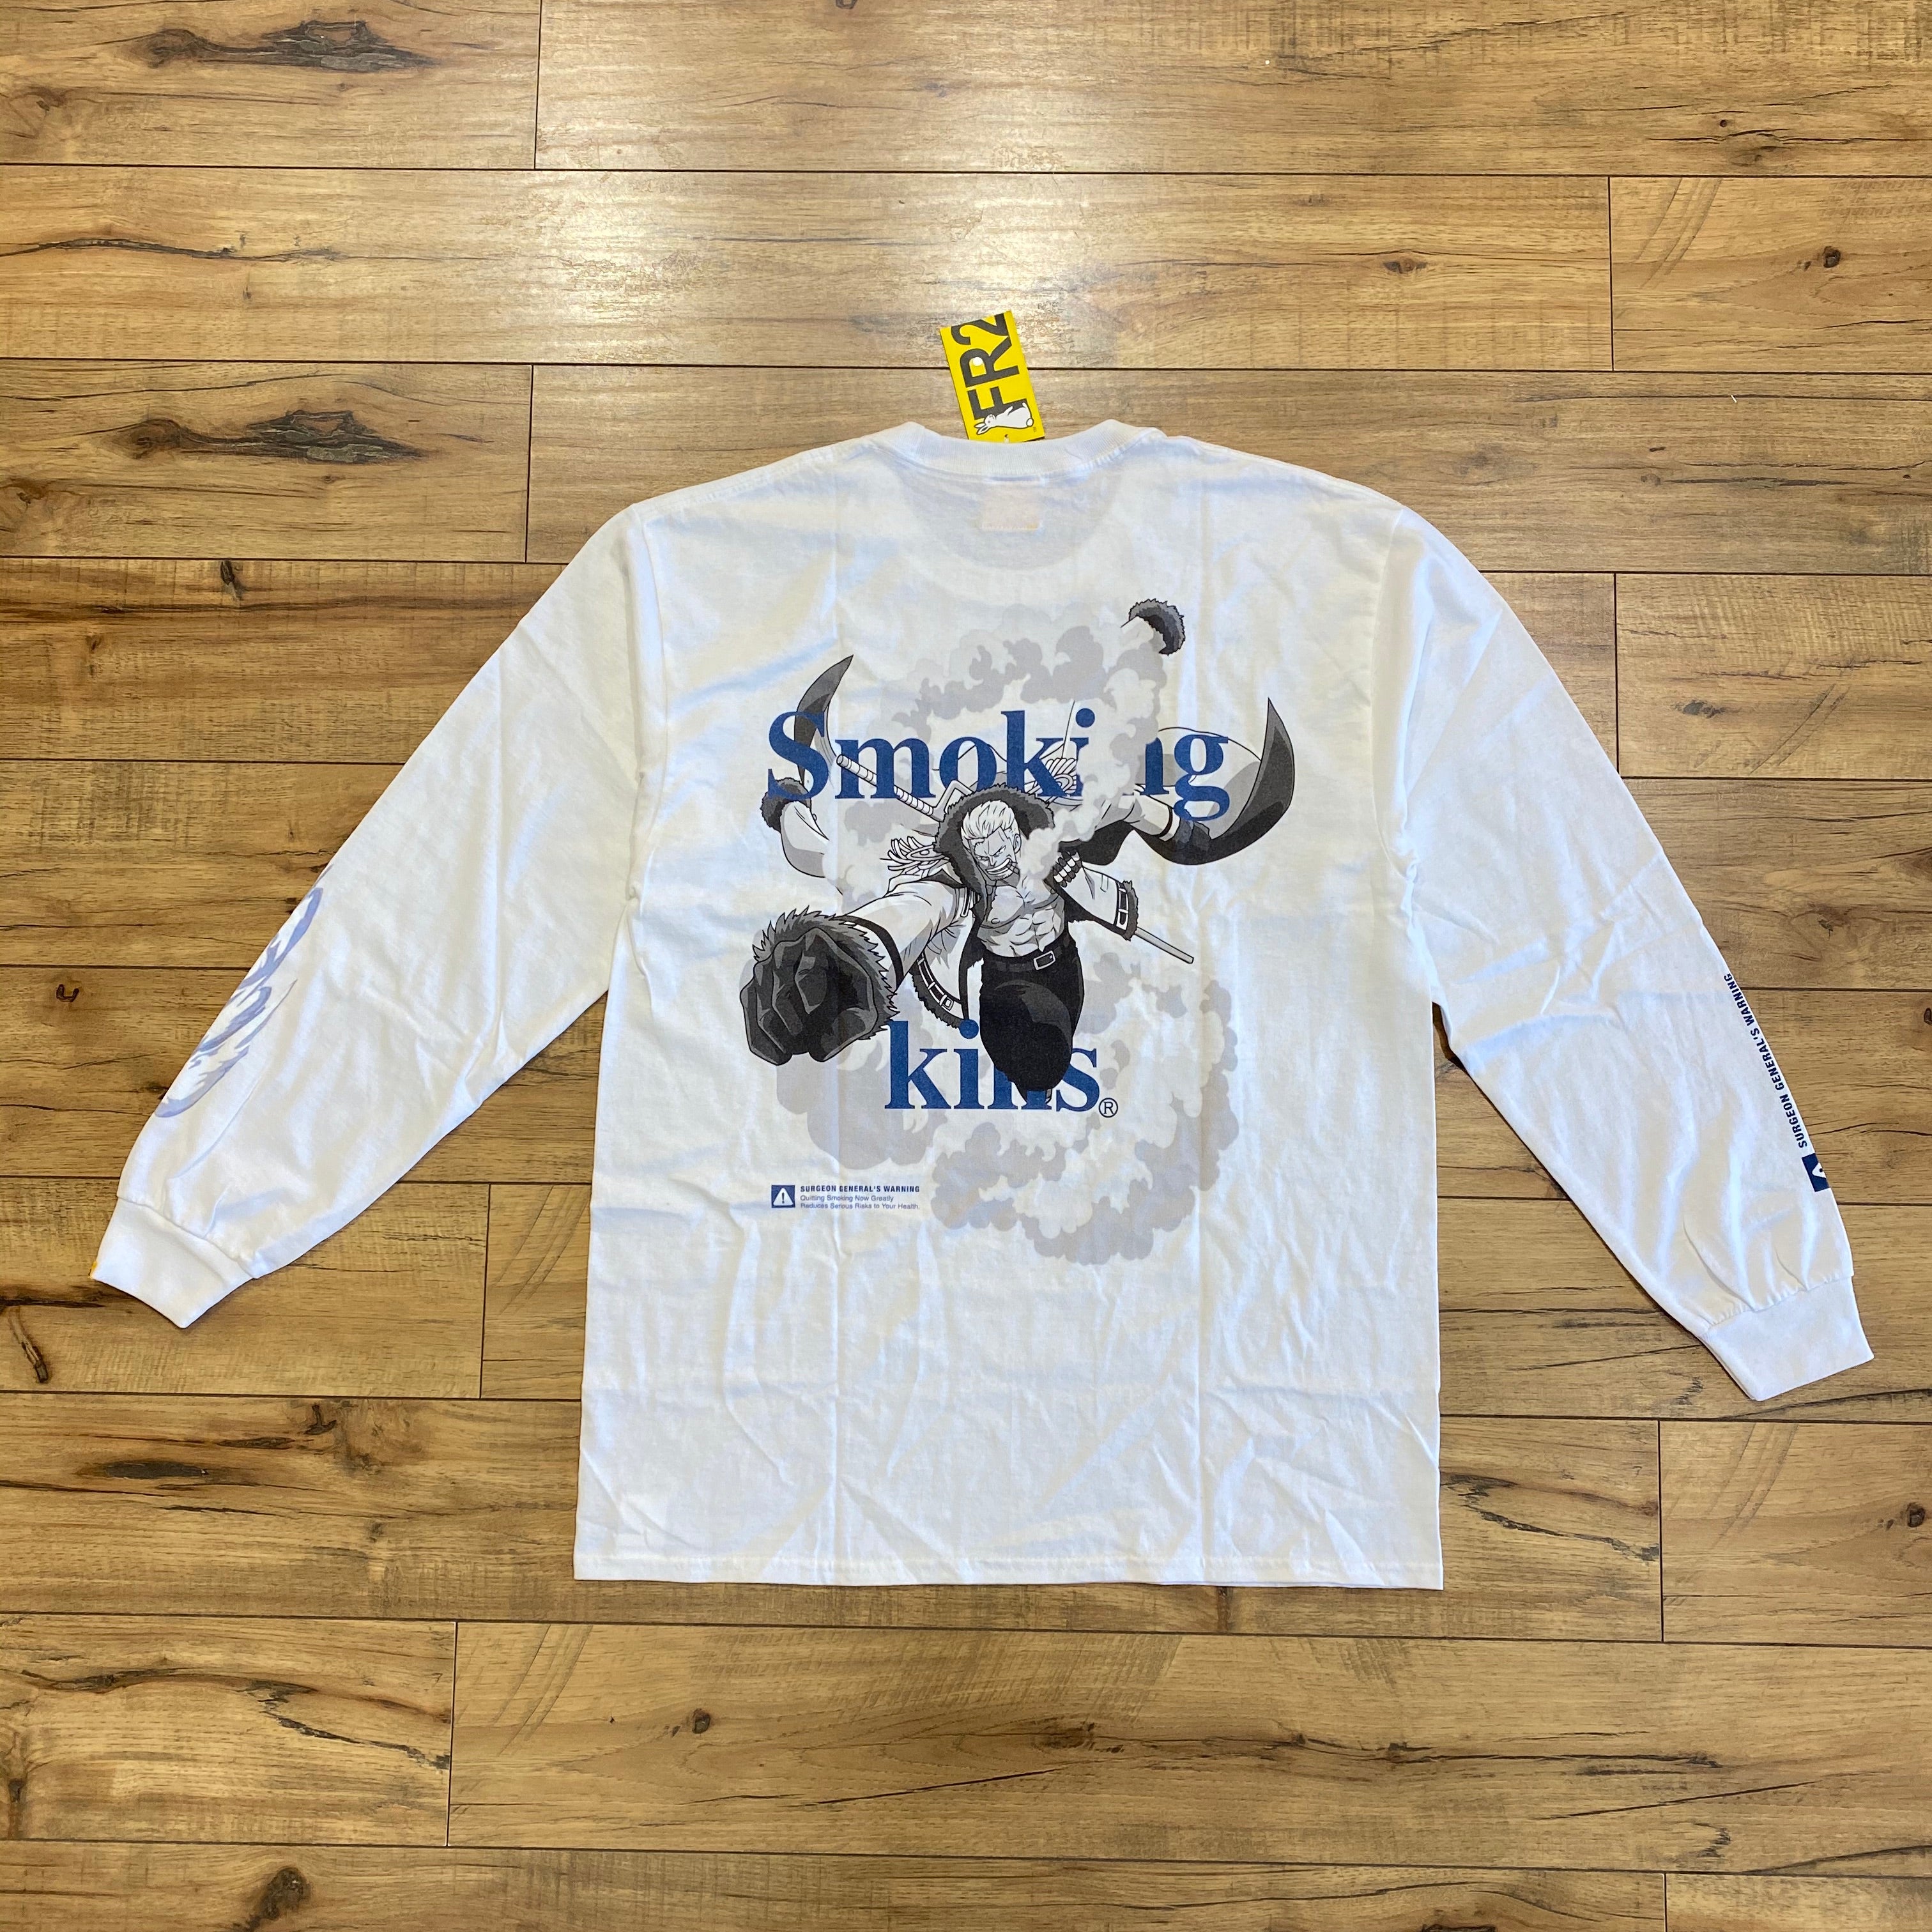 Fr2 X One Piece Action Smoker Long Sleeve T Shirt Superbored Clothing Ltd